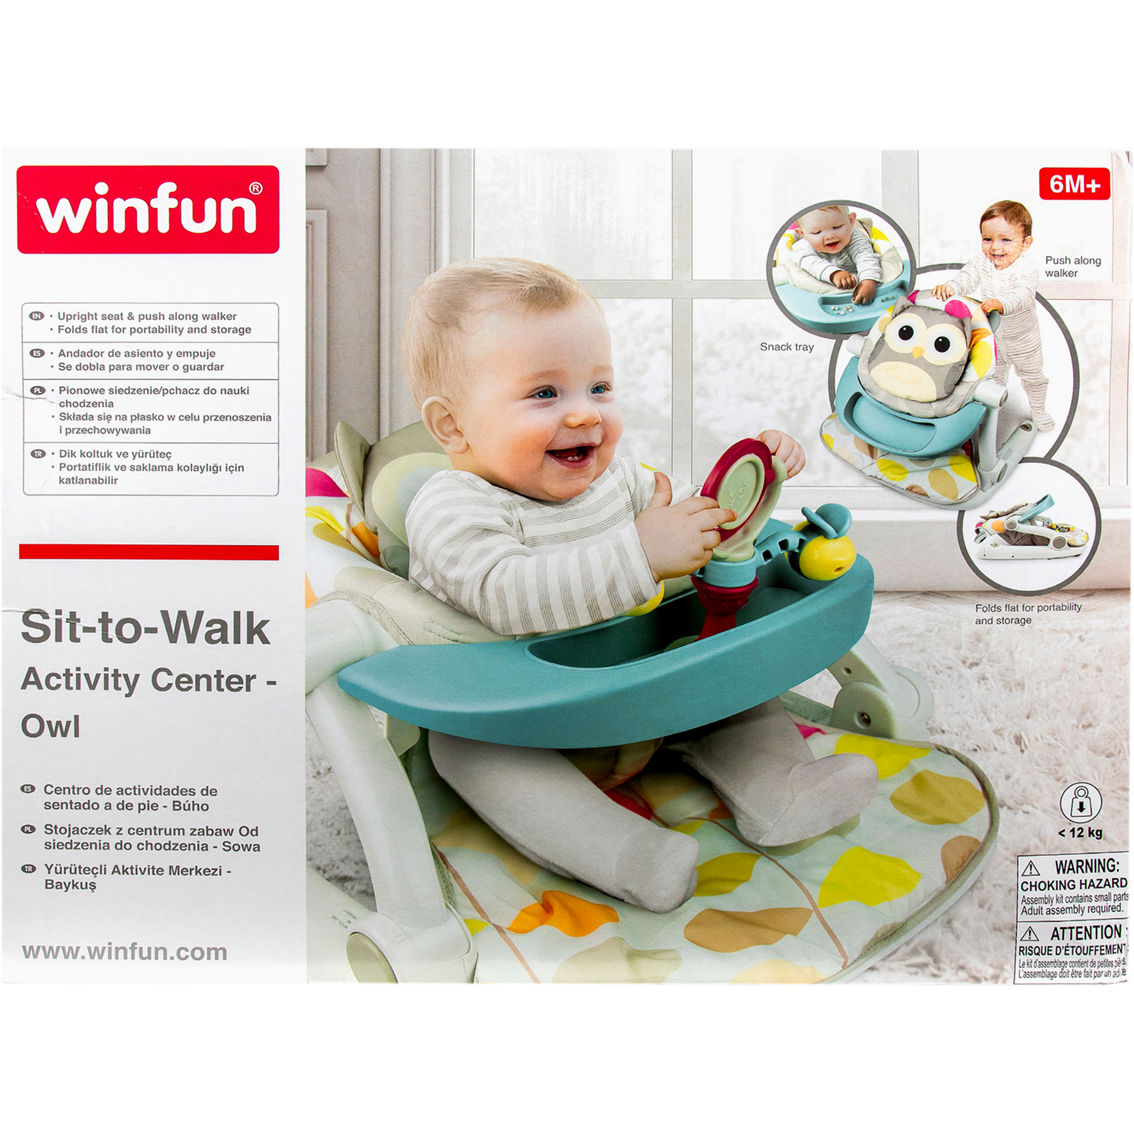 Winfun Sit to Walk Activity Center - Image 3 of 3